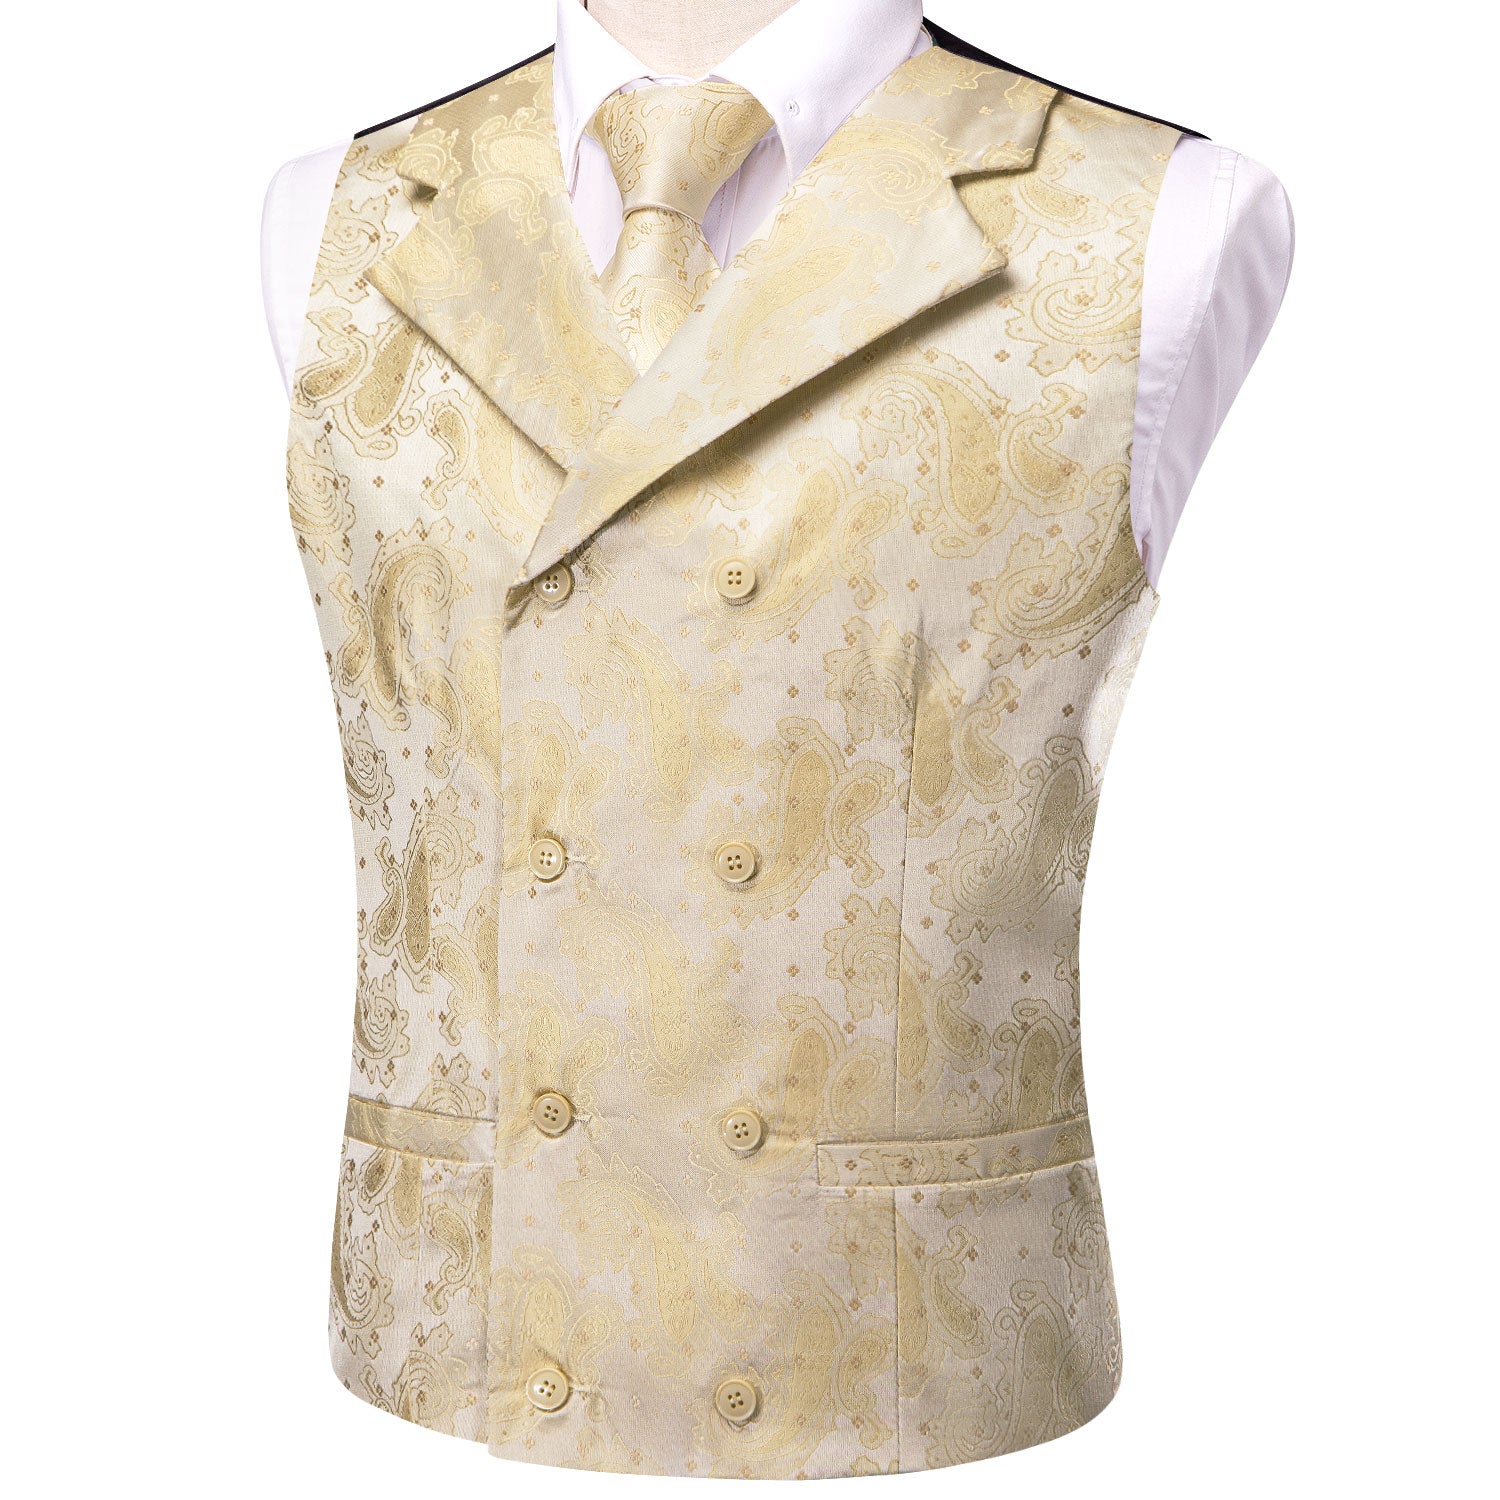 Double breasted Men's beige paisley vest on white shirt 